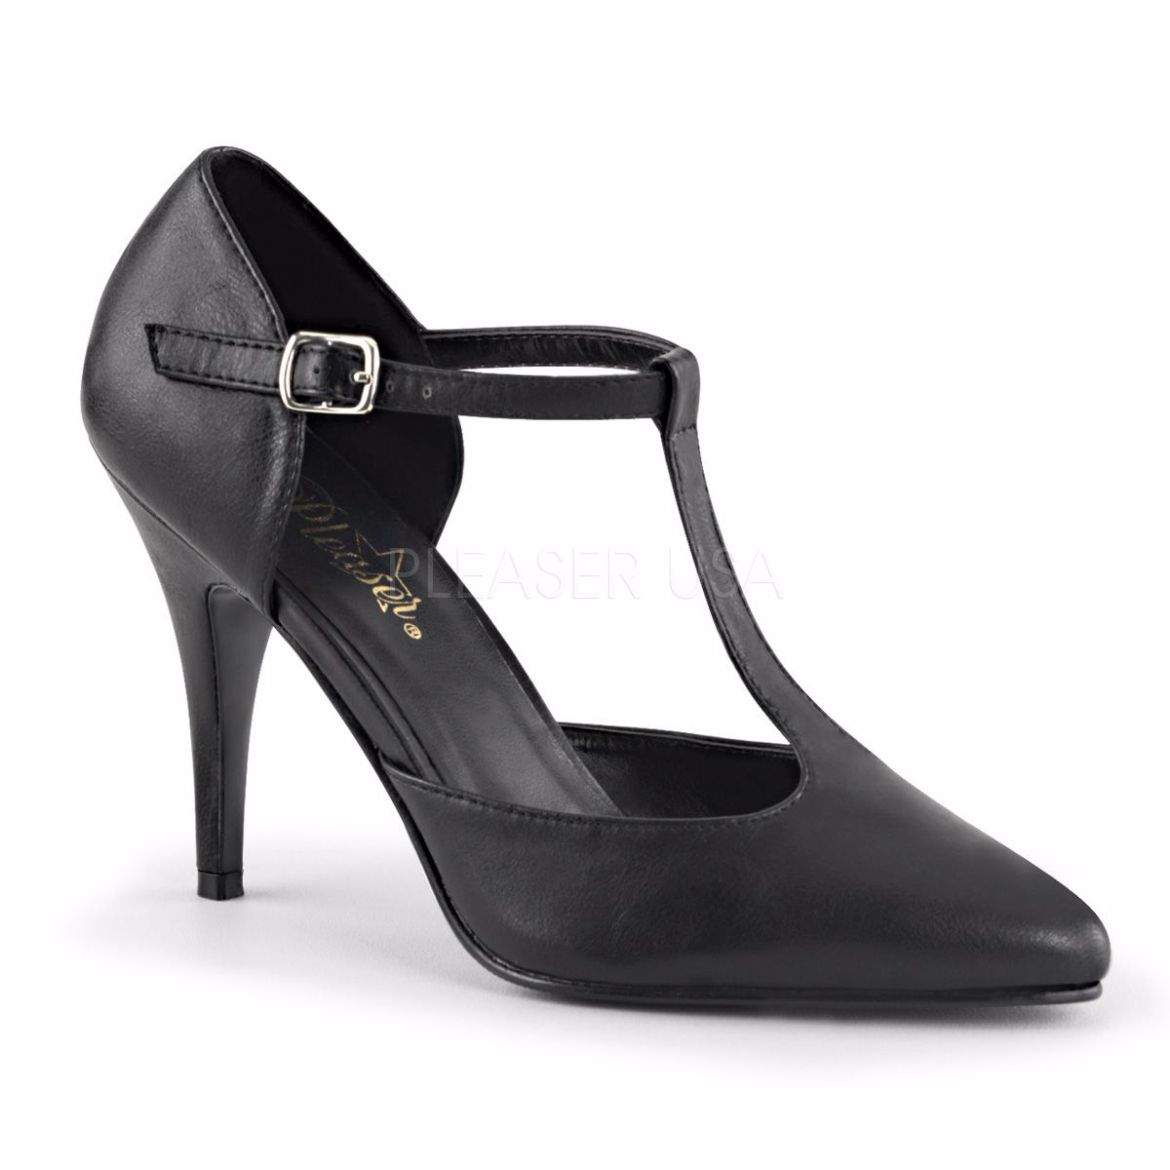 Product image of Pleaser Vanity-415 Black Faux Leather, 4 inch (10.2 cm) Heel Court Pump Shoes